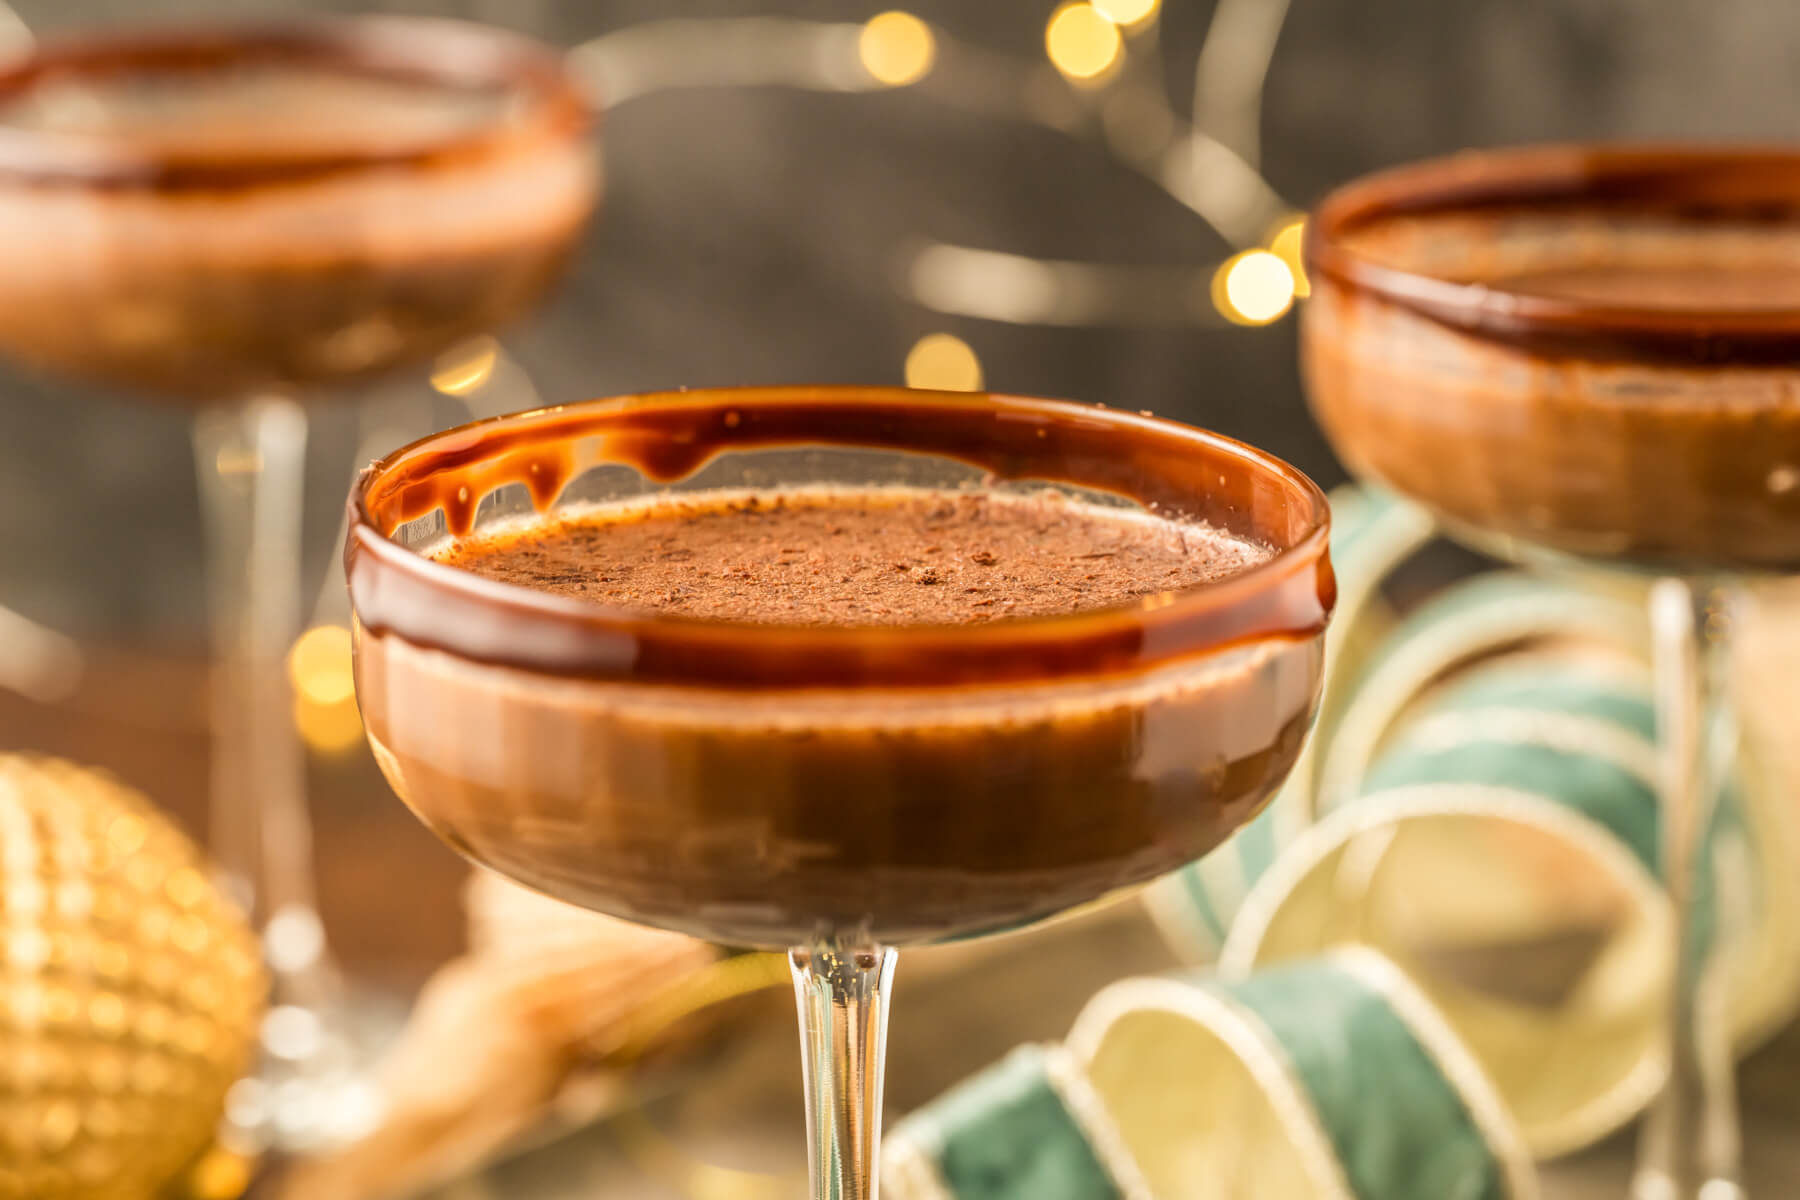 Three creamy brown Chocolate Espresso Martinis in coupe cocktail glasses garnished with chocolate rim and chocolate shavings.